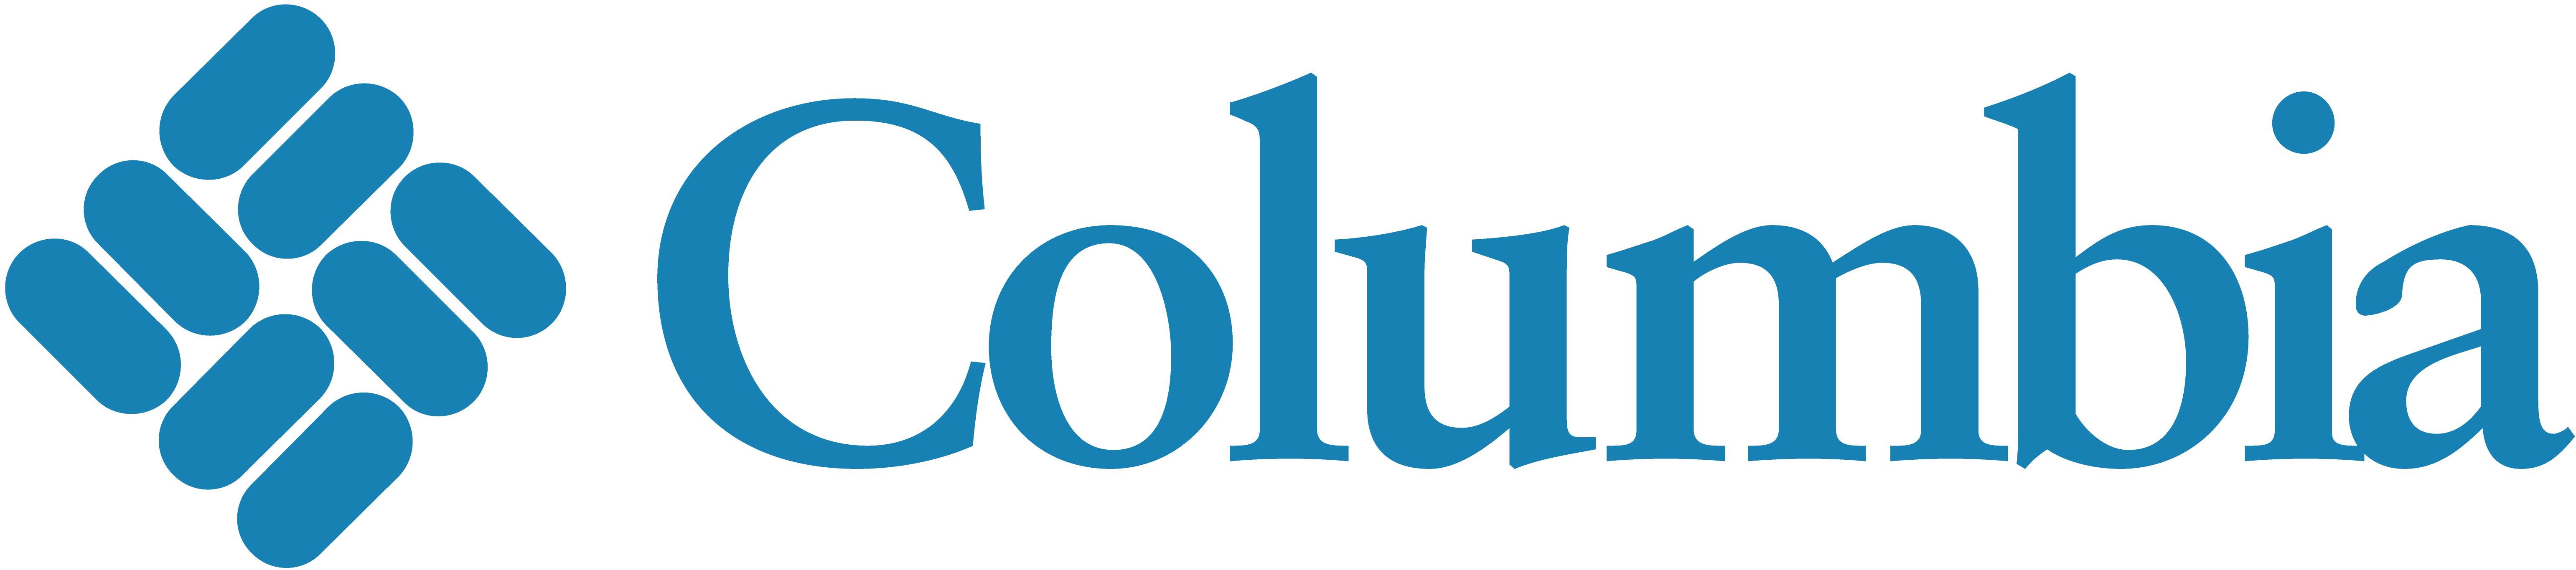 Columbia Apparel Logo - Columbia Sportswear Delivers High-Impact, Targeted And Personalized ...